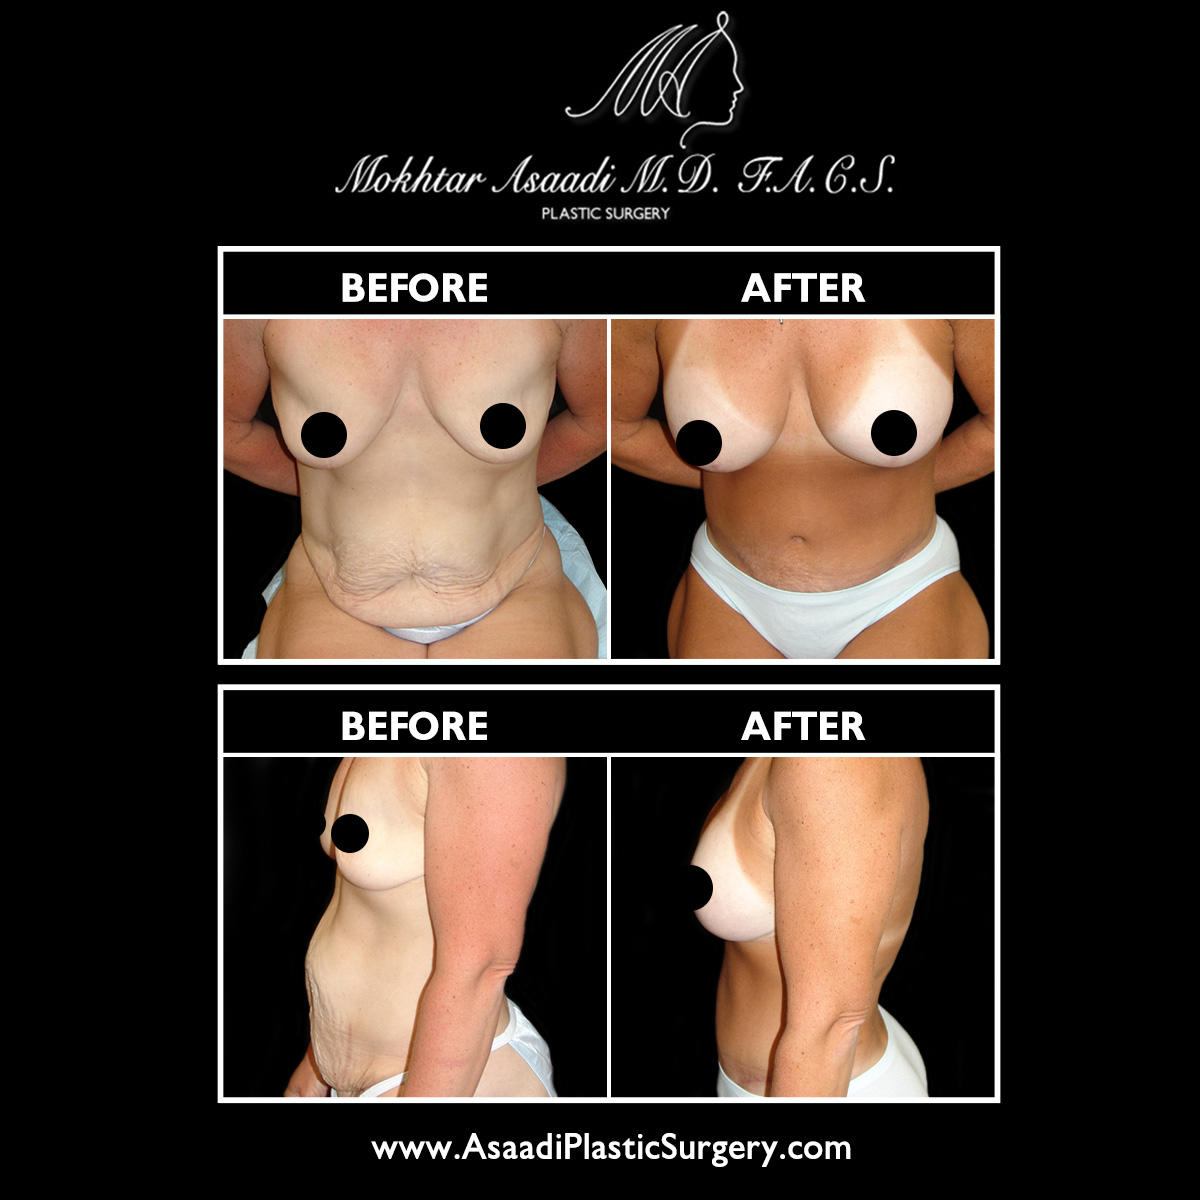 Dr. Asaadi performs mommy makeover in New Jersey. A mommy makeover can remove excess abdominal fat while tightening the underlying muscles and improve the shape and size of the breasts. During a mommy makeover, breast augmentation, liposuction, abdominoplasty, and more are combined to sculpt the midsection, improve body contours, and enhance the breasts.